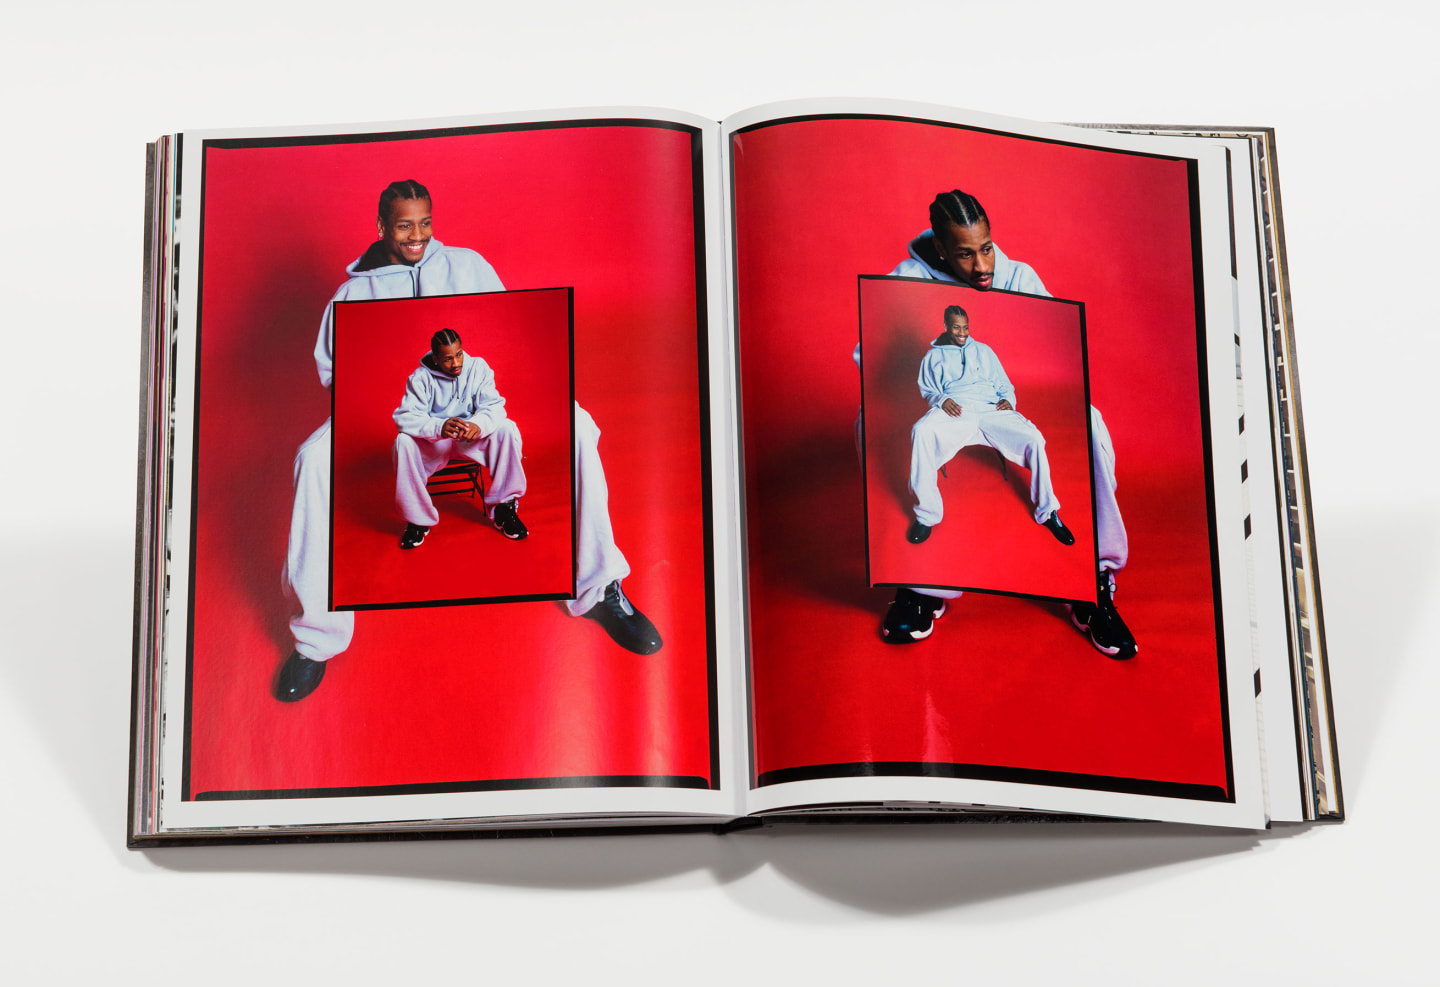 Allen Iverson Is The G.O.A.T. So Gary Land Made A Photo Book To Celebrate His Legacy.